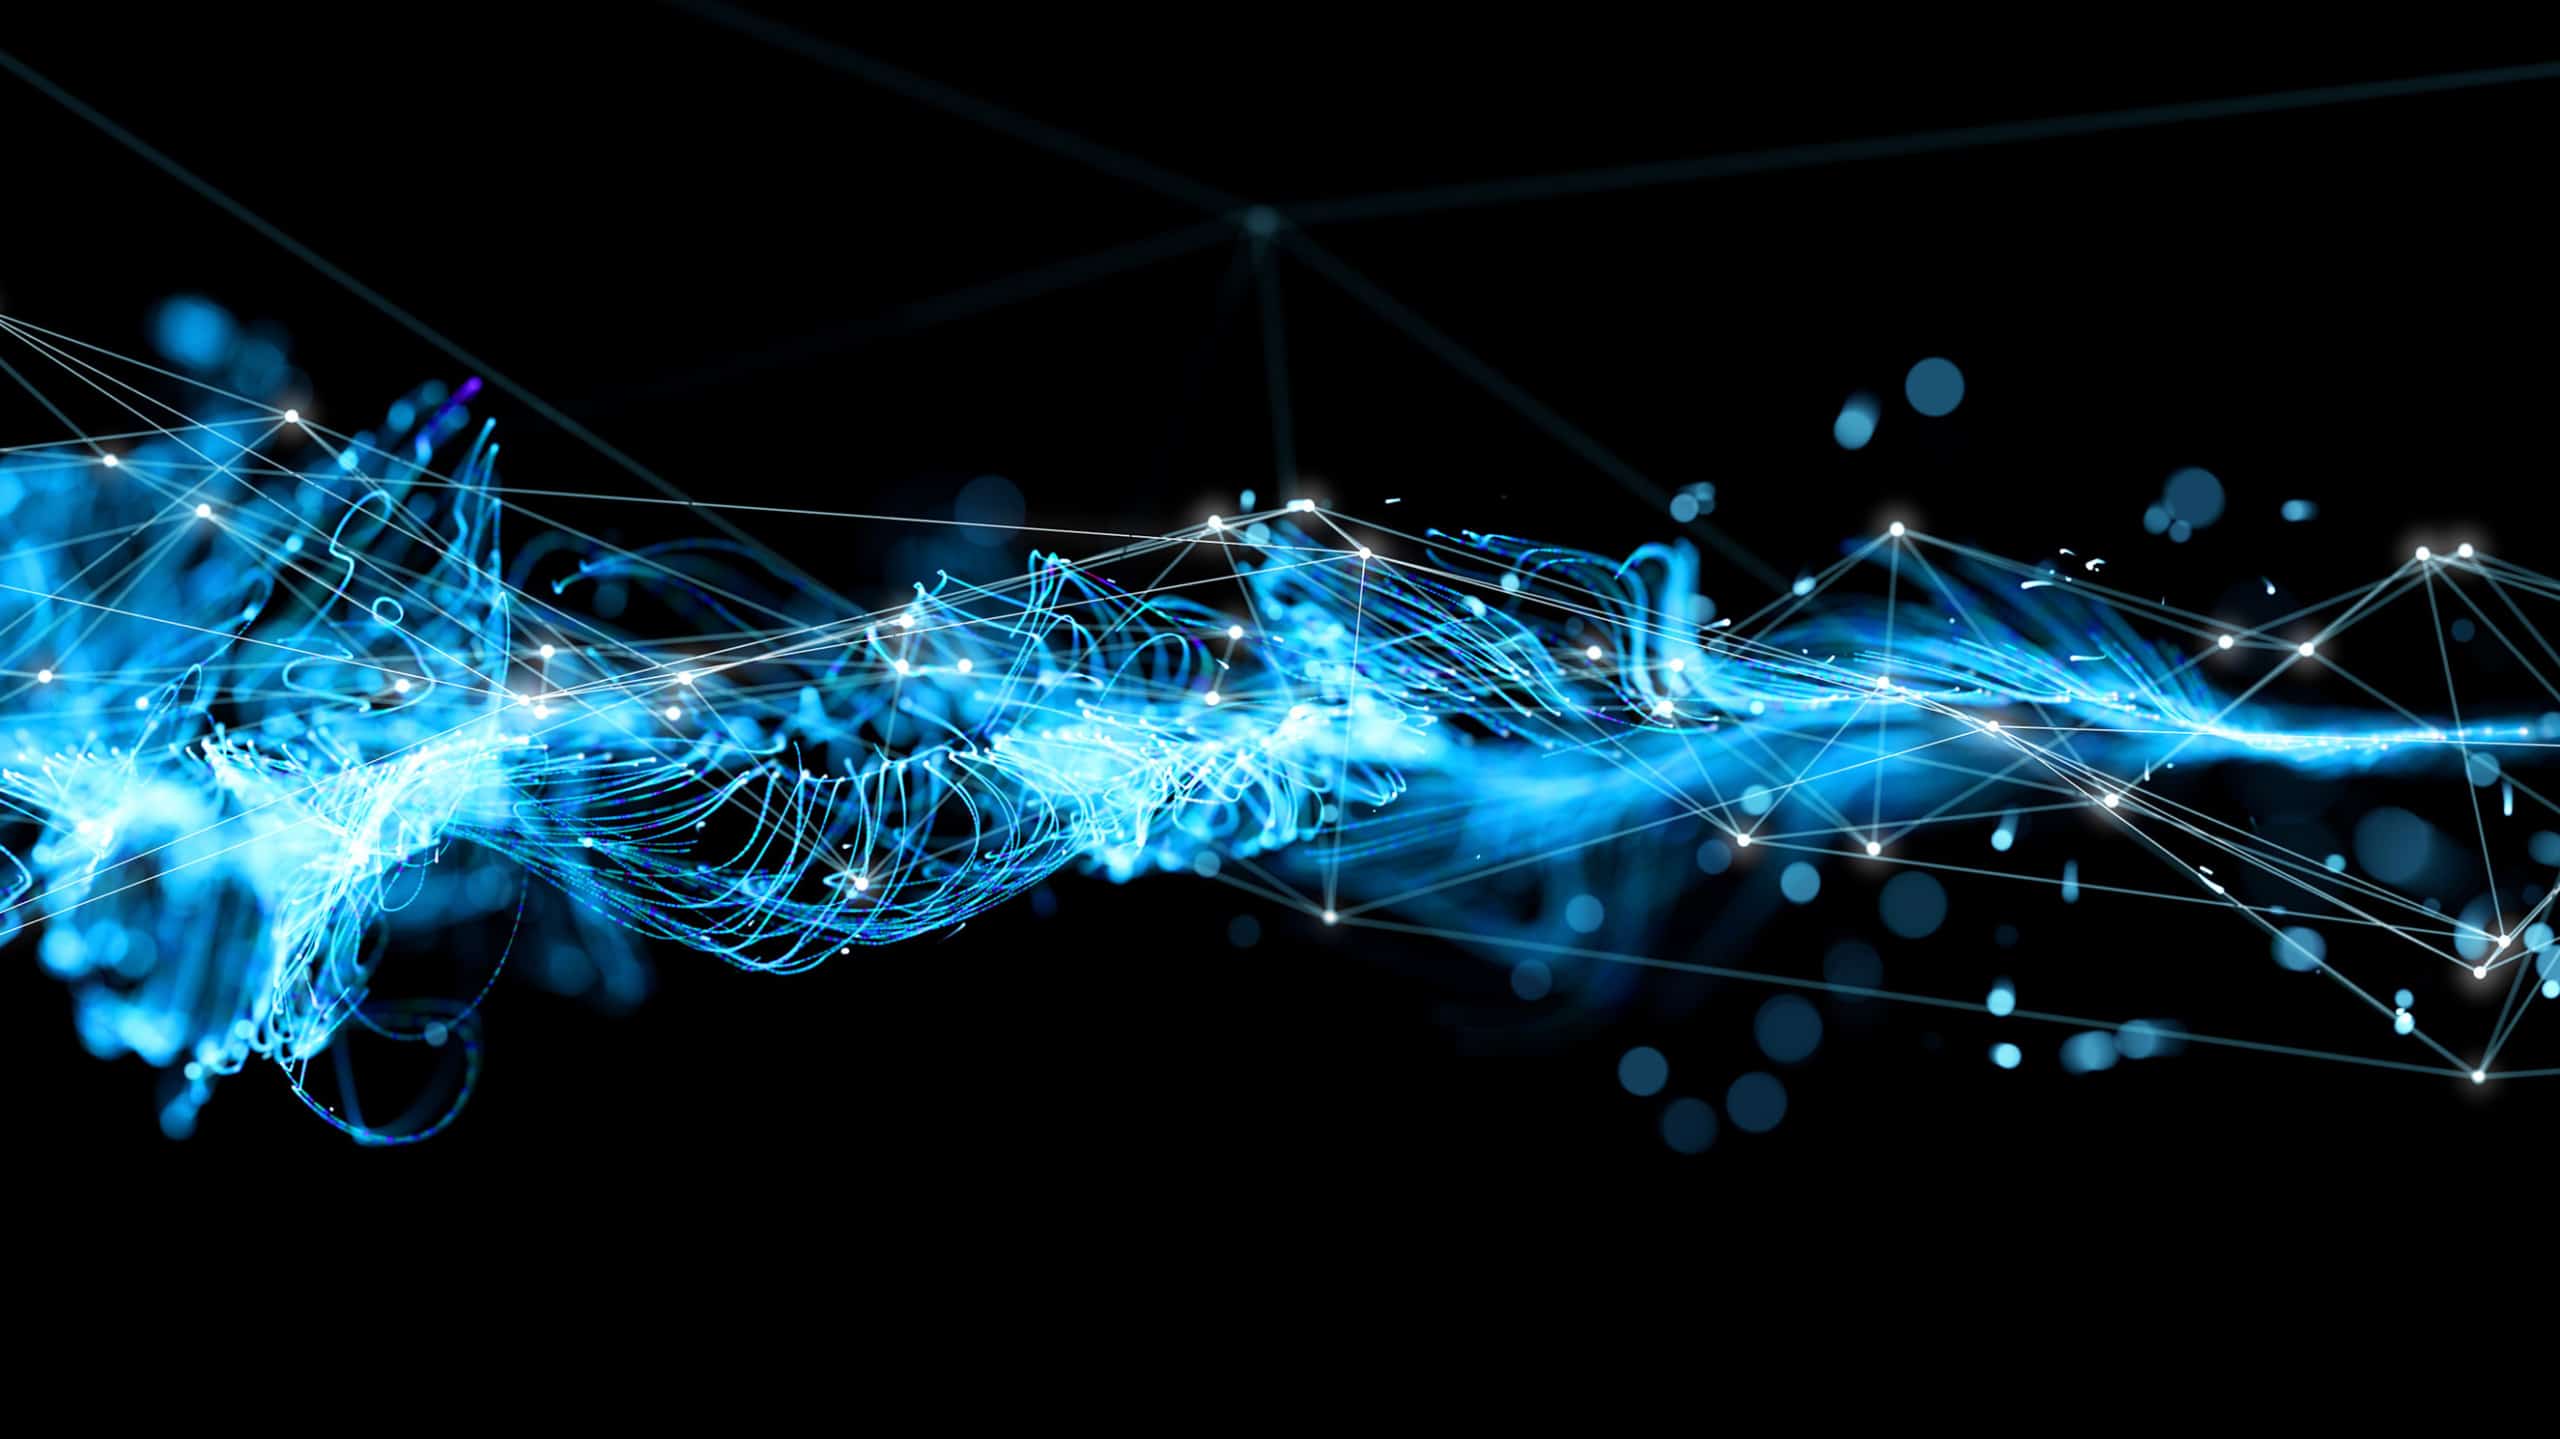 An abstract digital image featuring dynamic blue lines and connected dots on a dark background, representing a network or data flow concept.